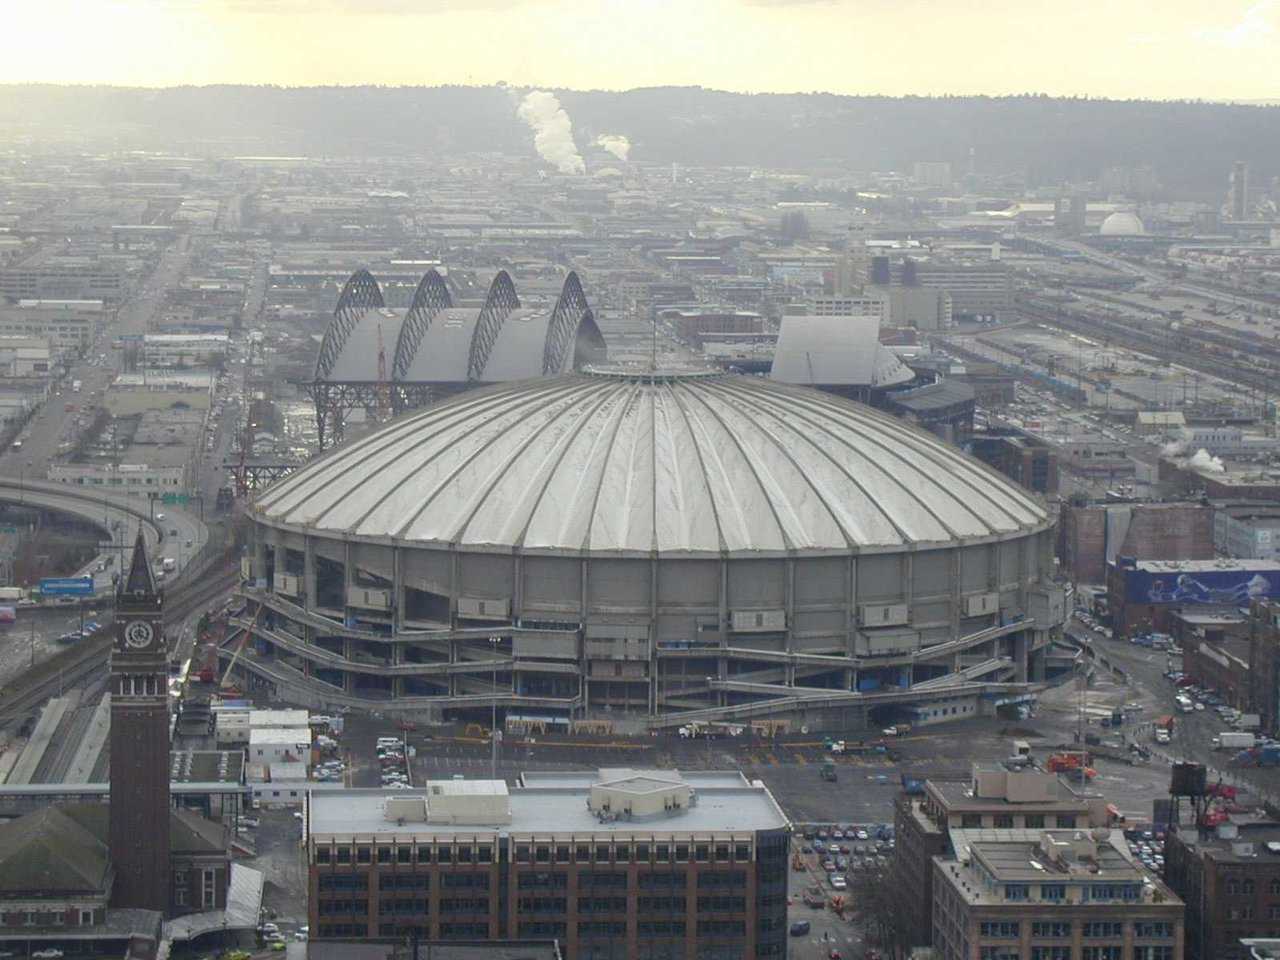 Kingdome — Seattle, Washington — A $67-million concrete multipurpose stadium, the Kingdome’s seating was designed for football and opened with a soccer match on April 9, 1976.